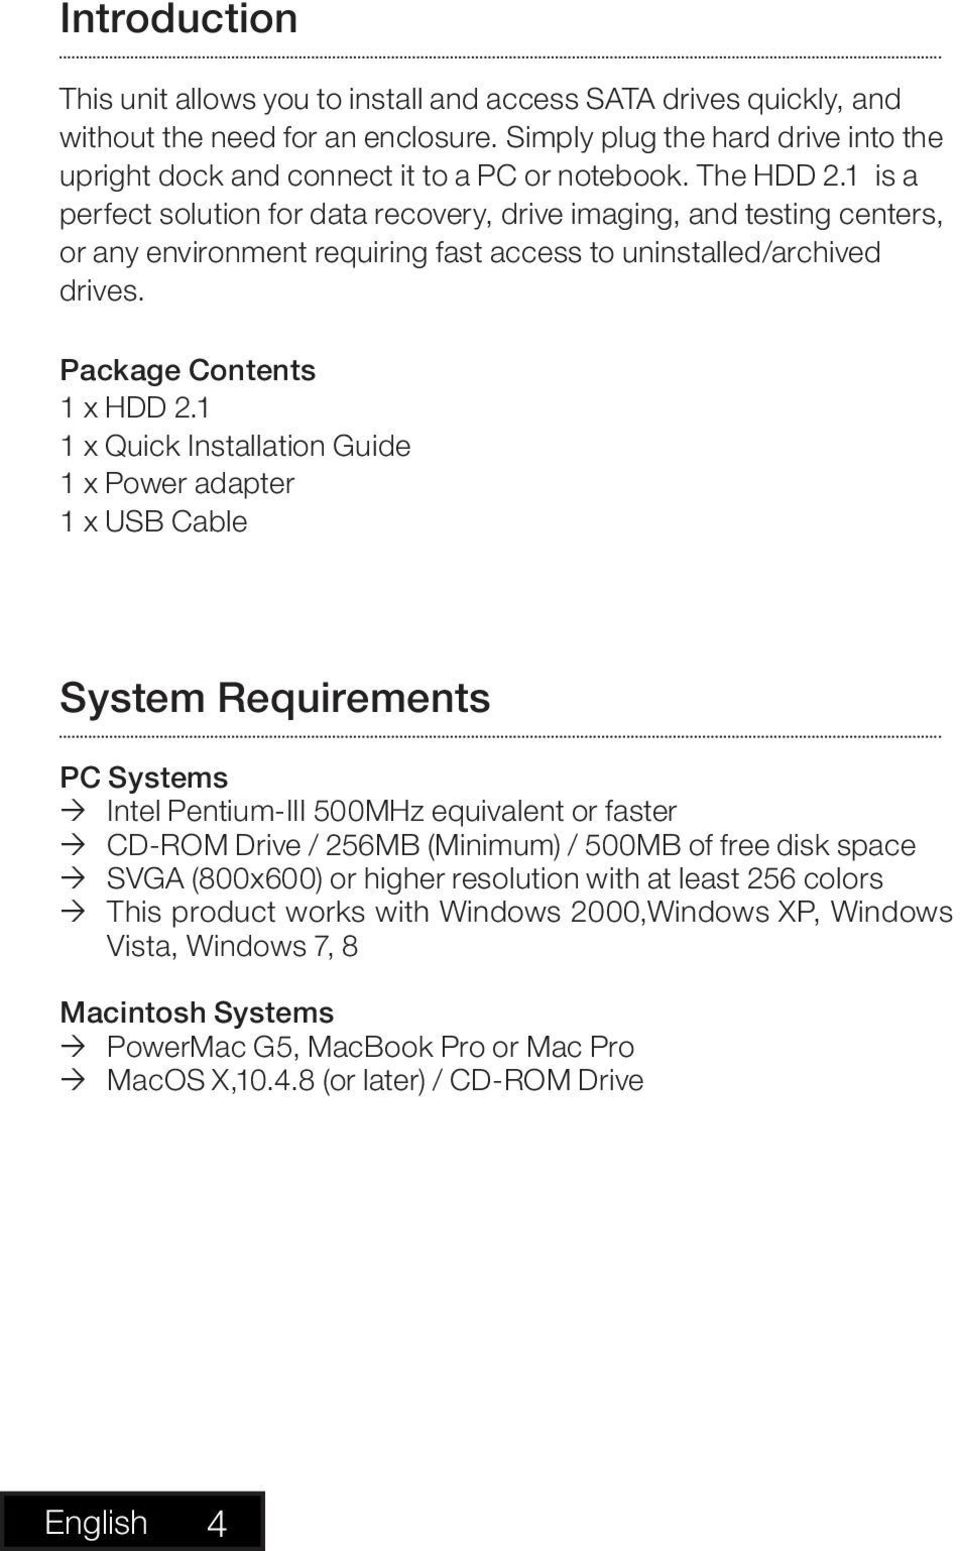 1 1 x Quick Installation Guide 1 x Power adapter 1 x USB Cable System Requirements PC Systems Intel Pentium-III 500MHz equivalent or faster CD-ROM Drive / 256MB (Minimum) / 500MB of free disk space